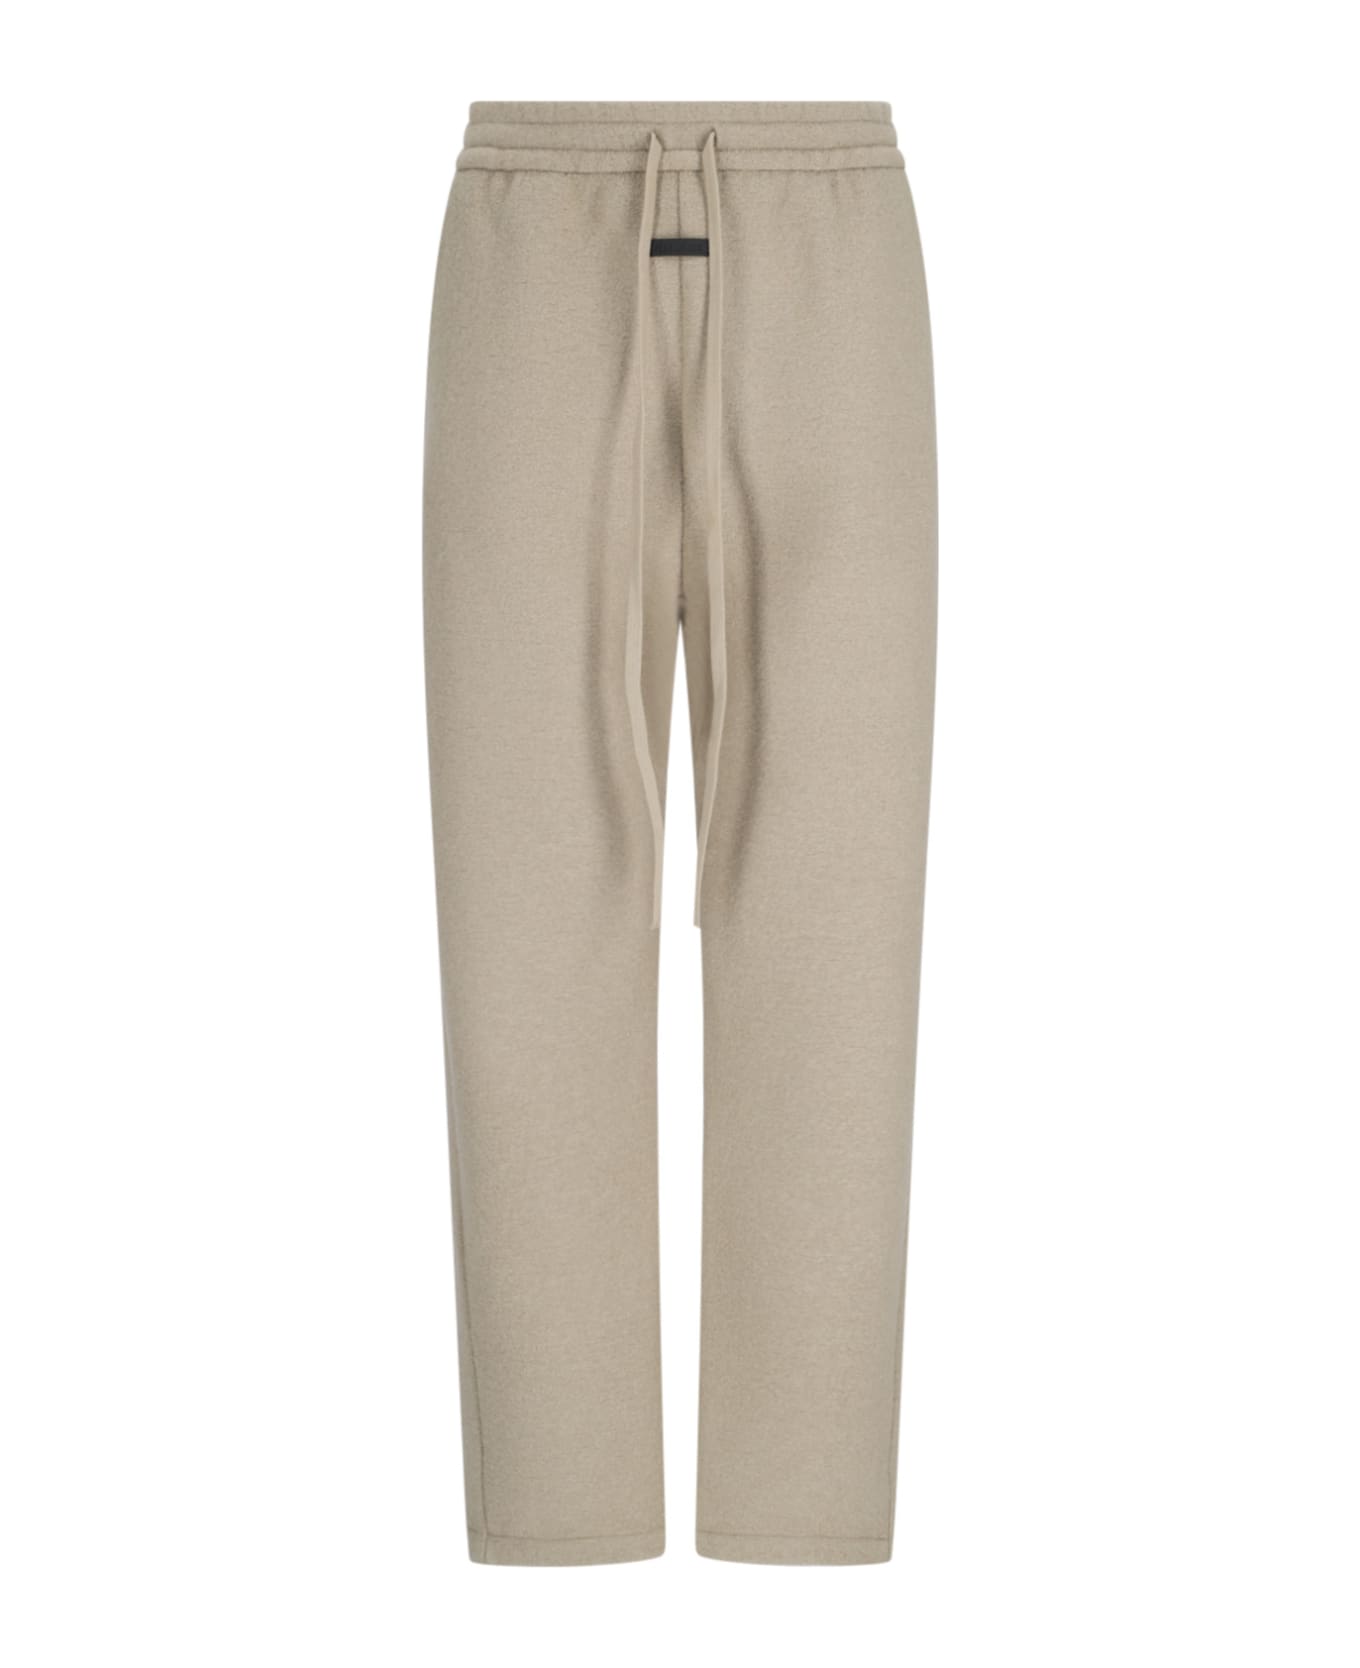 Fear of God Joggers - Beige ボトムス